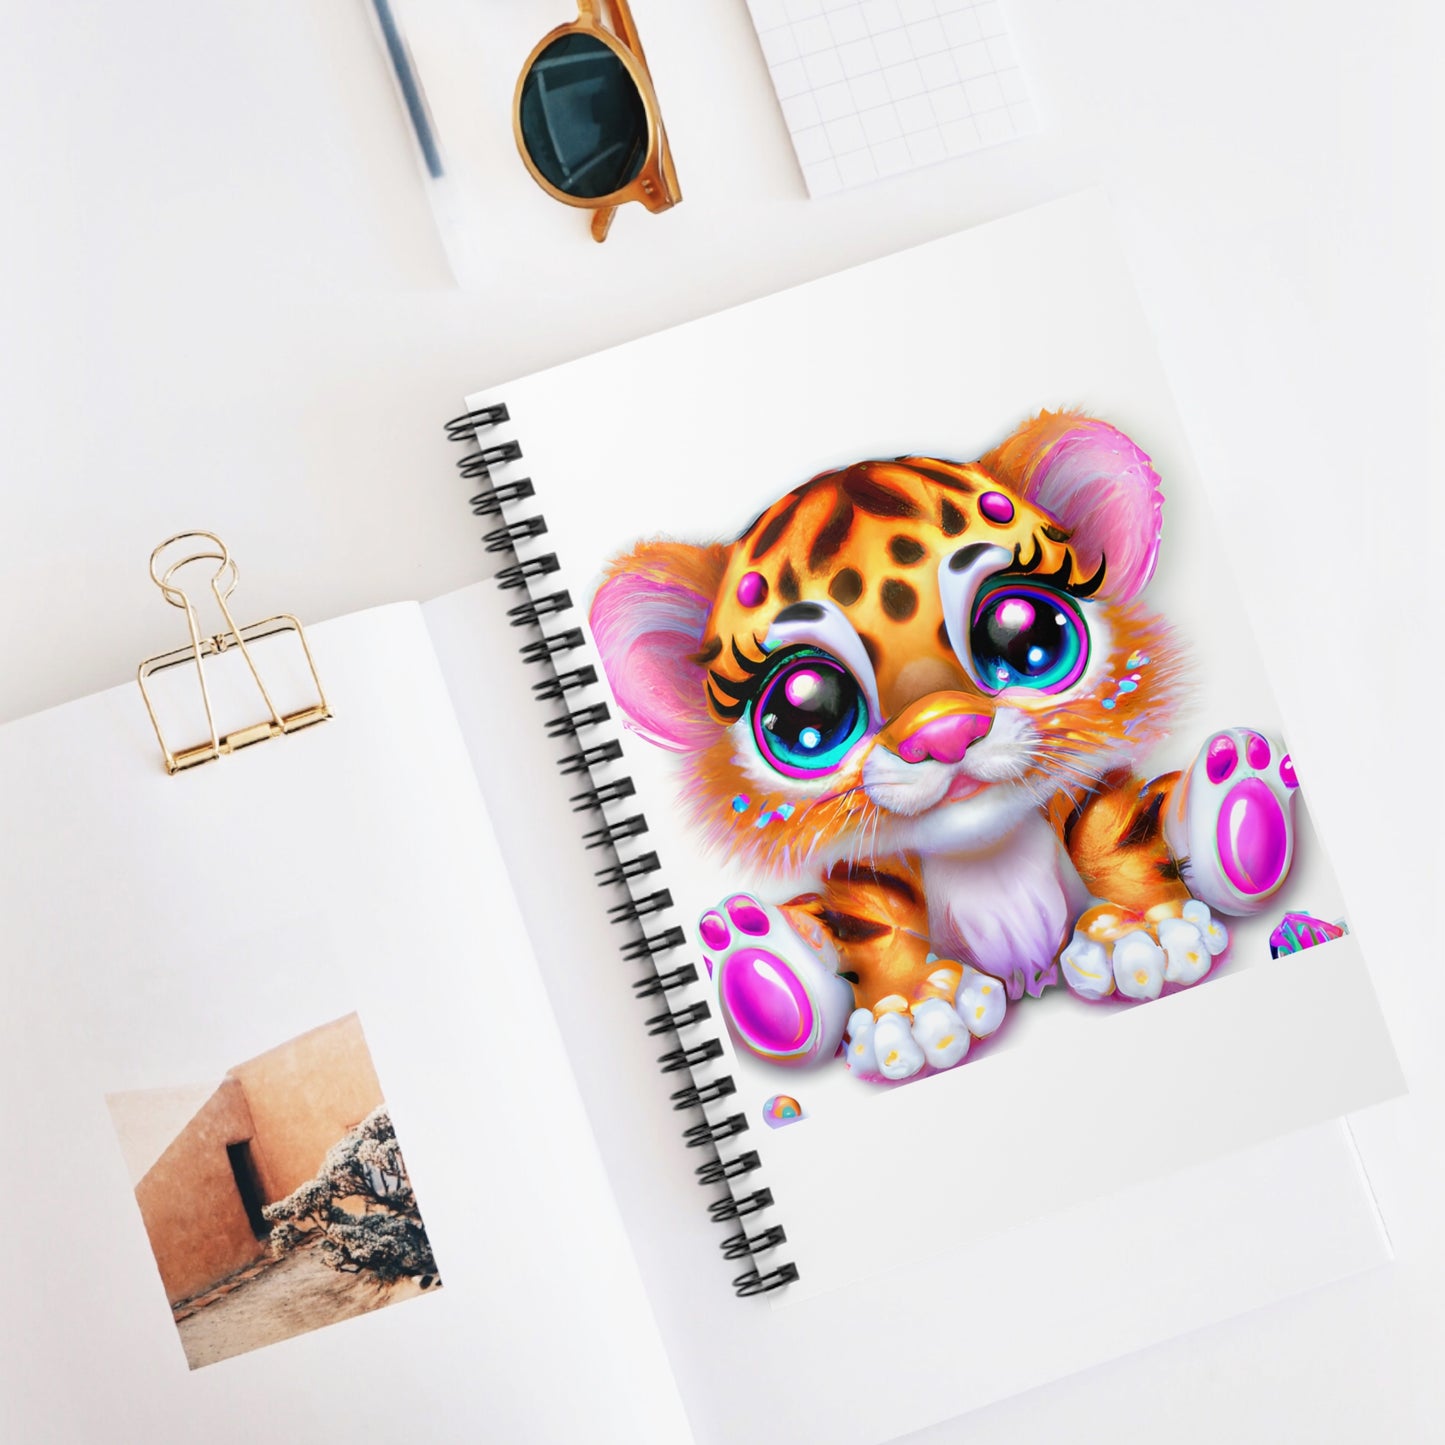 Tiger Cub: Spiral Notebook - Log Books - Journals - Diaries - and More Custom Printed by TheGlassyLass.com